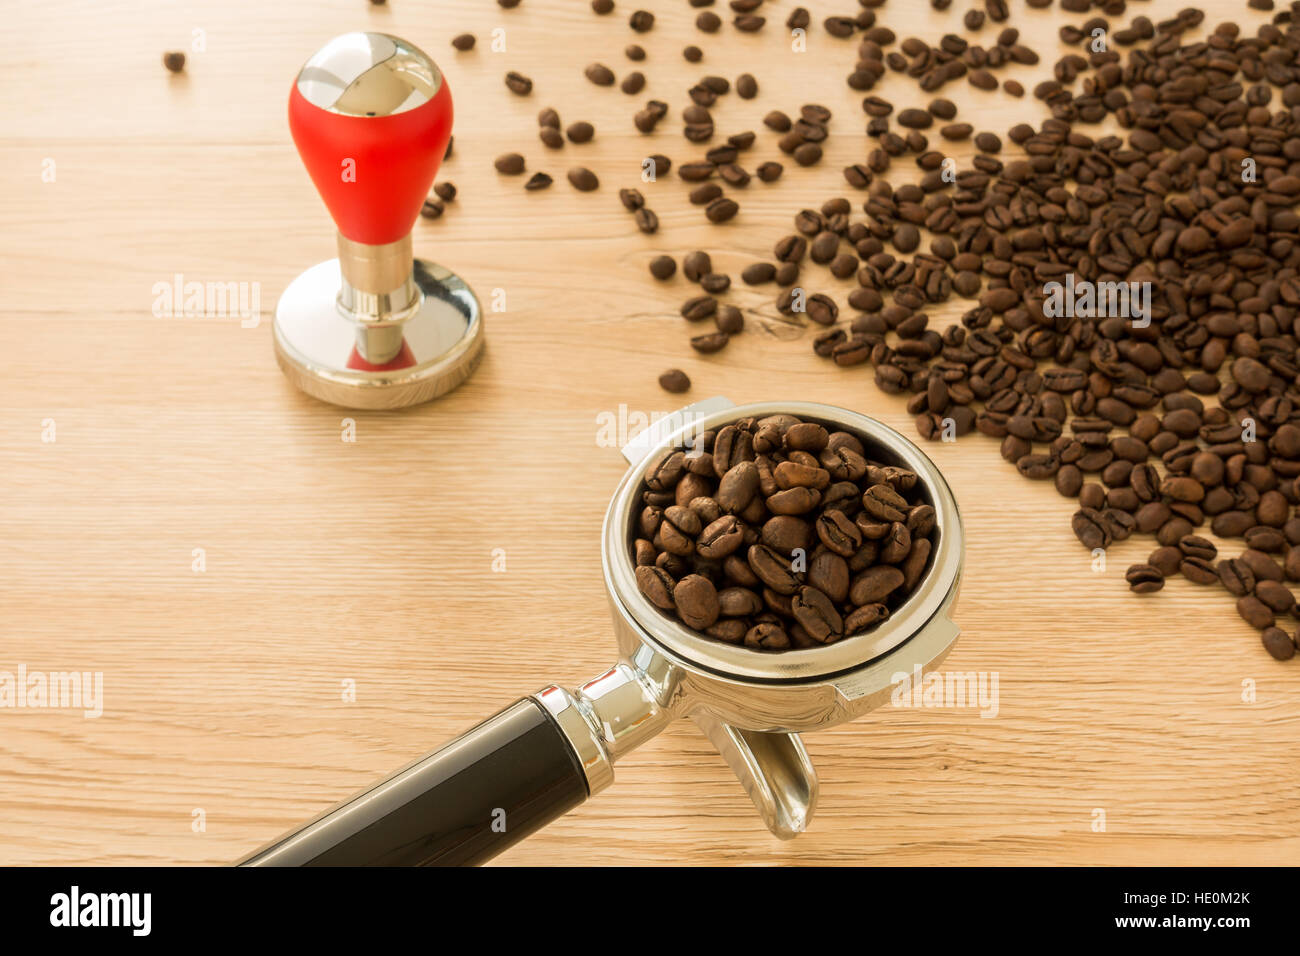 A Cup Roasted Coffee Beans And Ground Coffee On A Marble Table Stock Photo Picture And Royalty Free Image Image 104184958